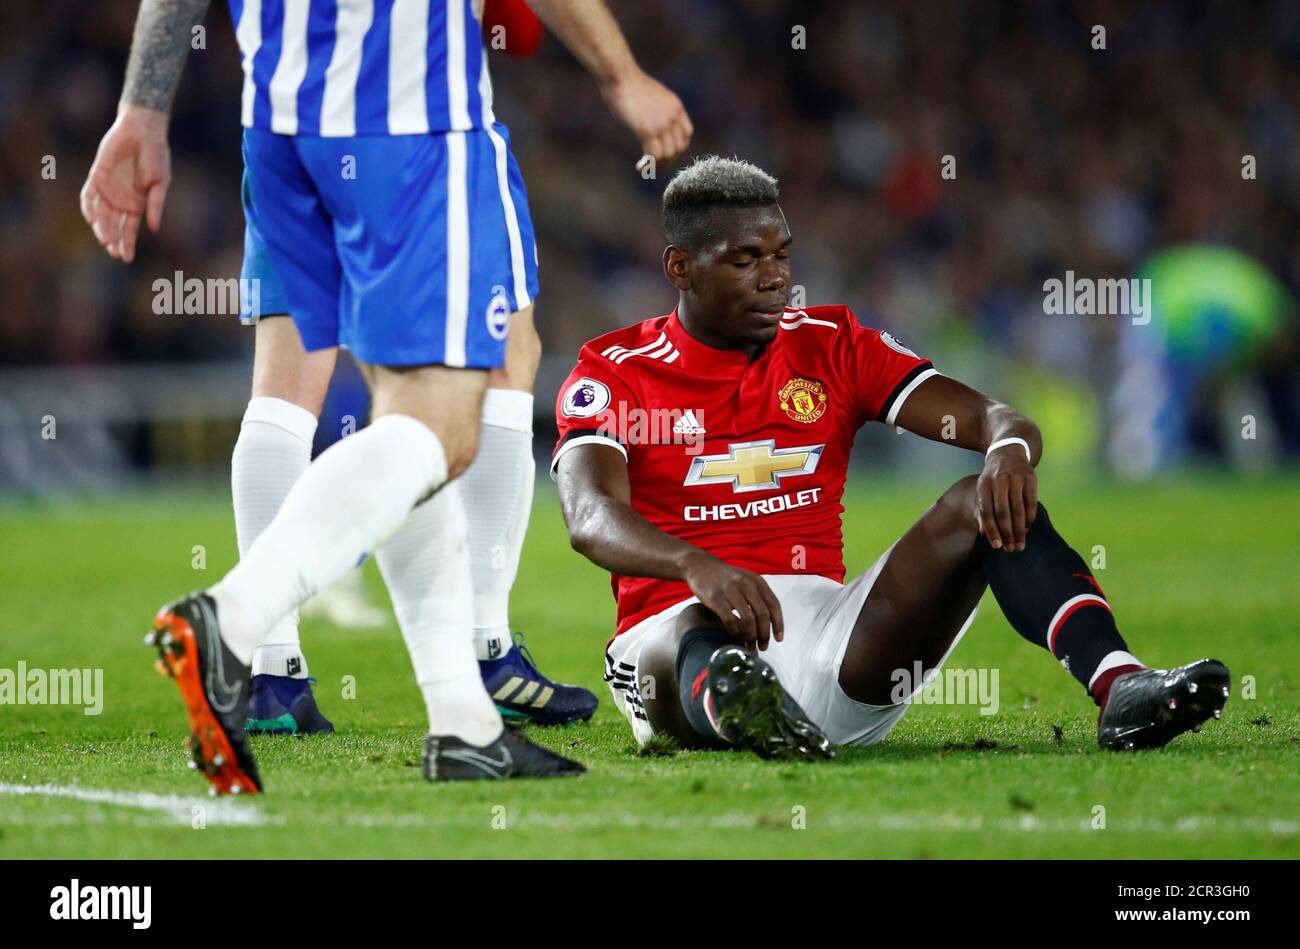 Soccer Football - Premier League - Brighton & Hove Albion v Manchester United - The American Express Community Stadium, Brighton, Britain - May 4, 2018   Manchester United's Paul Pogba reacts   REUTERS/Eddie Keogh    EDITORIAL USE ONLY. No use with unauthorized audio, video, data, fixture lists, club/league logos or 'live' services. Online in-match use limited to 75 images, no video emulation. No use in betting, games or single club/league/player publications.  Please contact your account representative for further details. Stock Photo